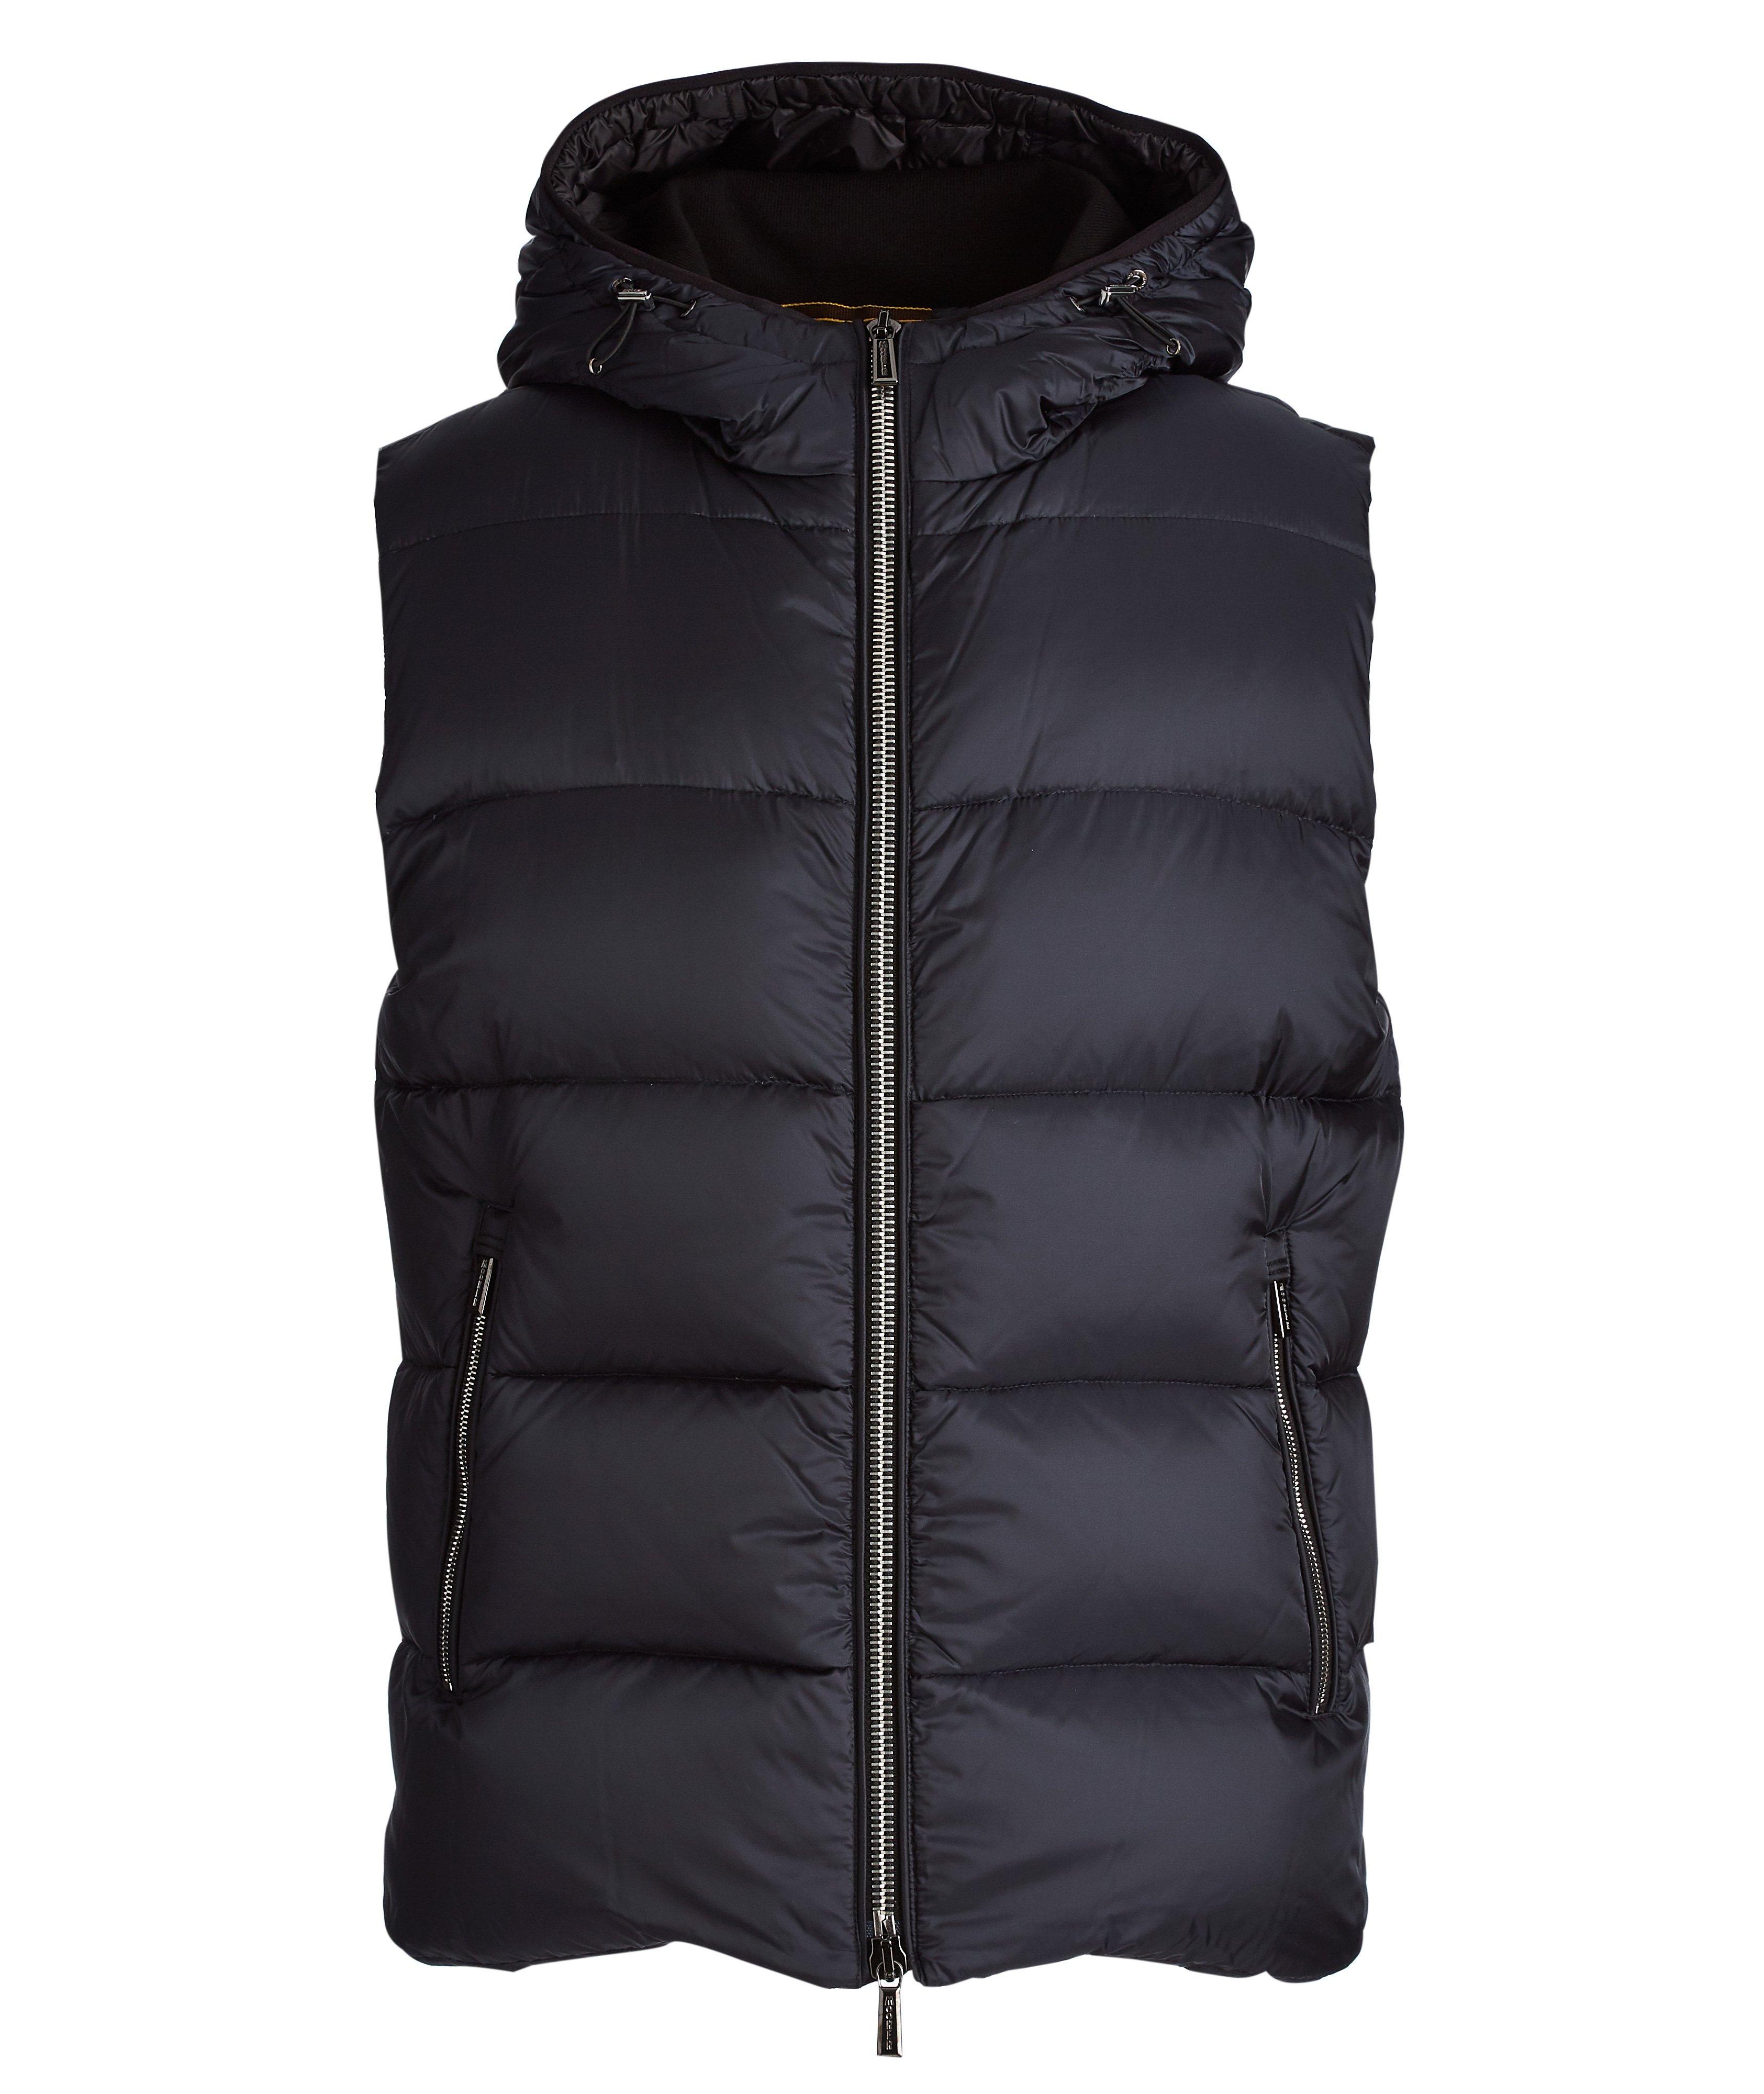 Perseo Hooded Down Vest image 0